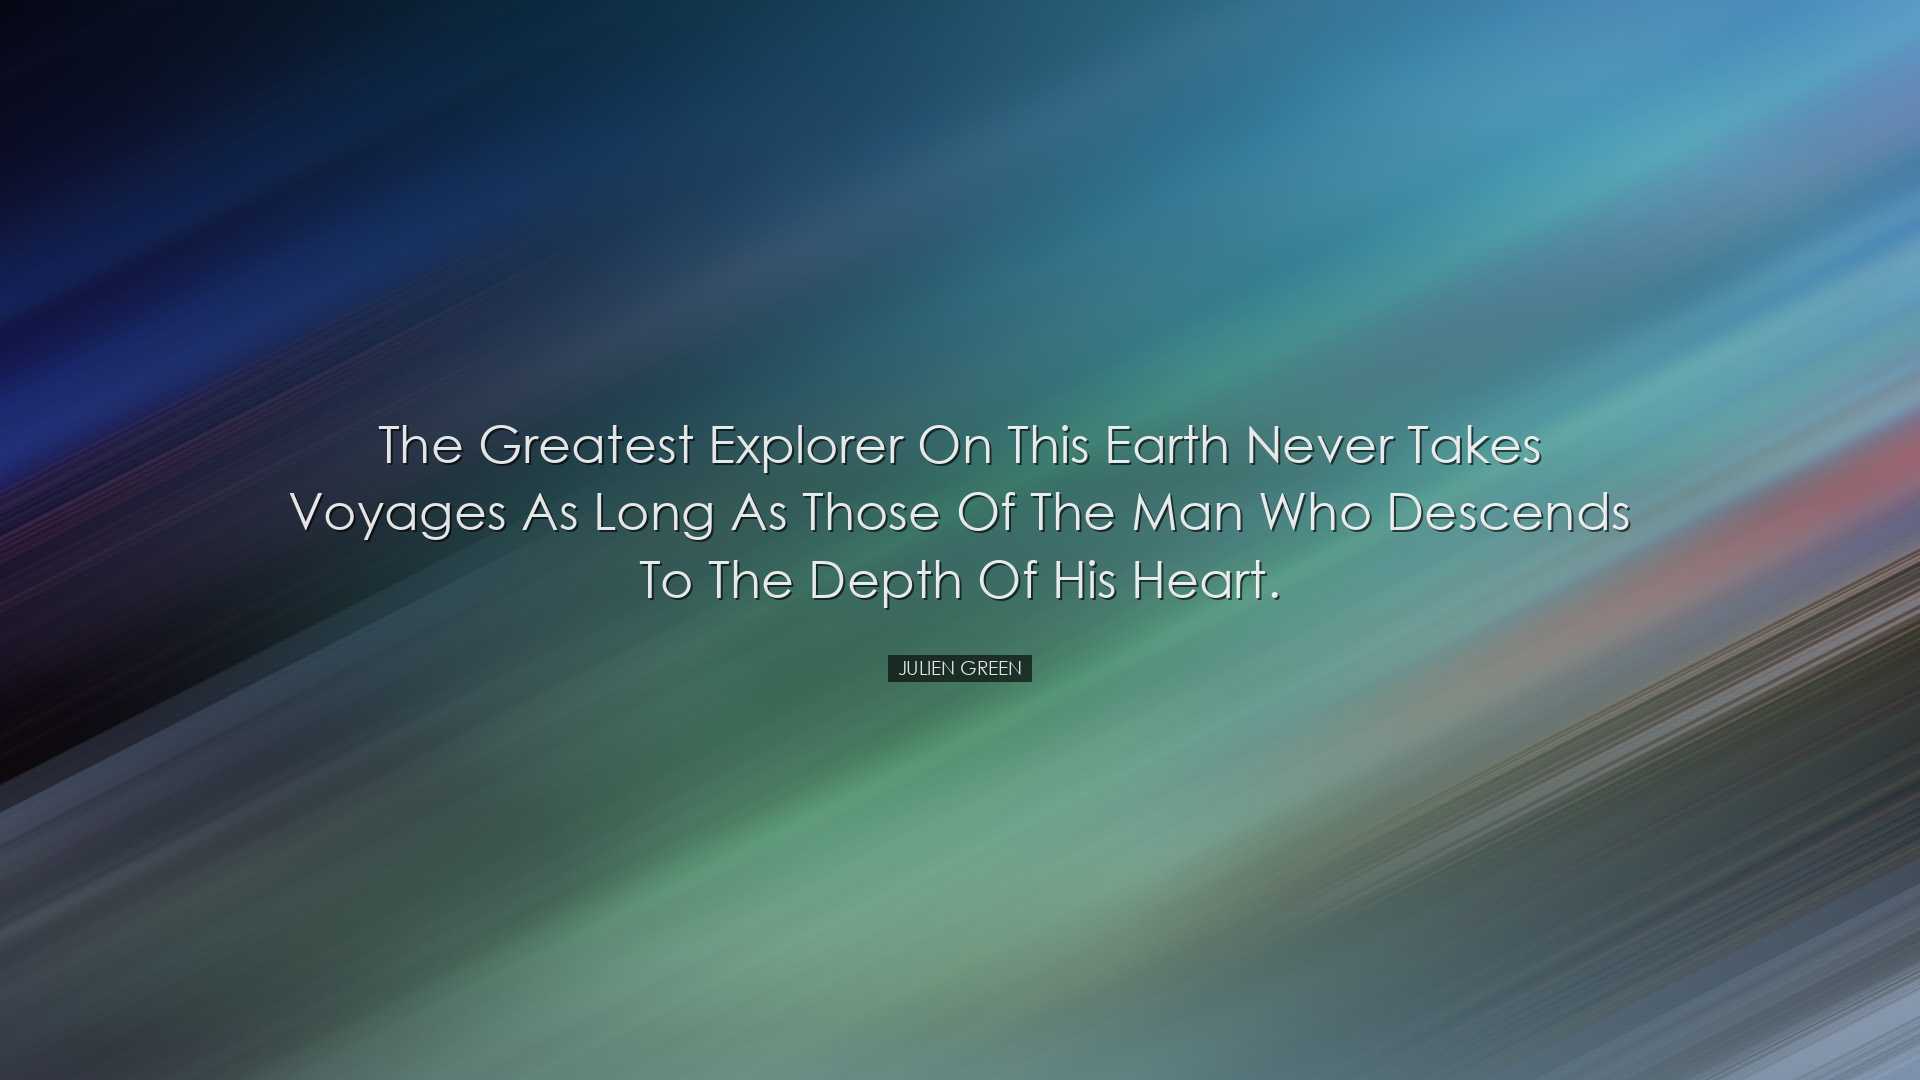 The greatest explorer on this earth never takes voyages as long as